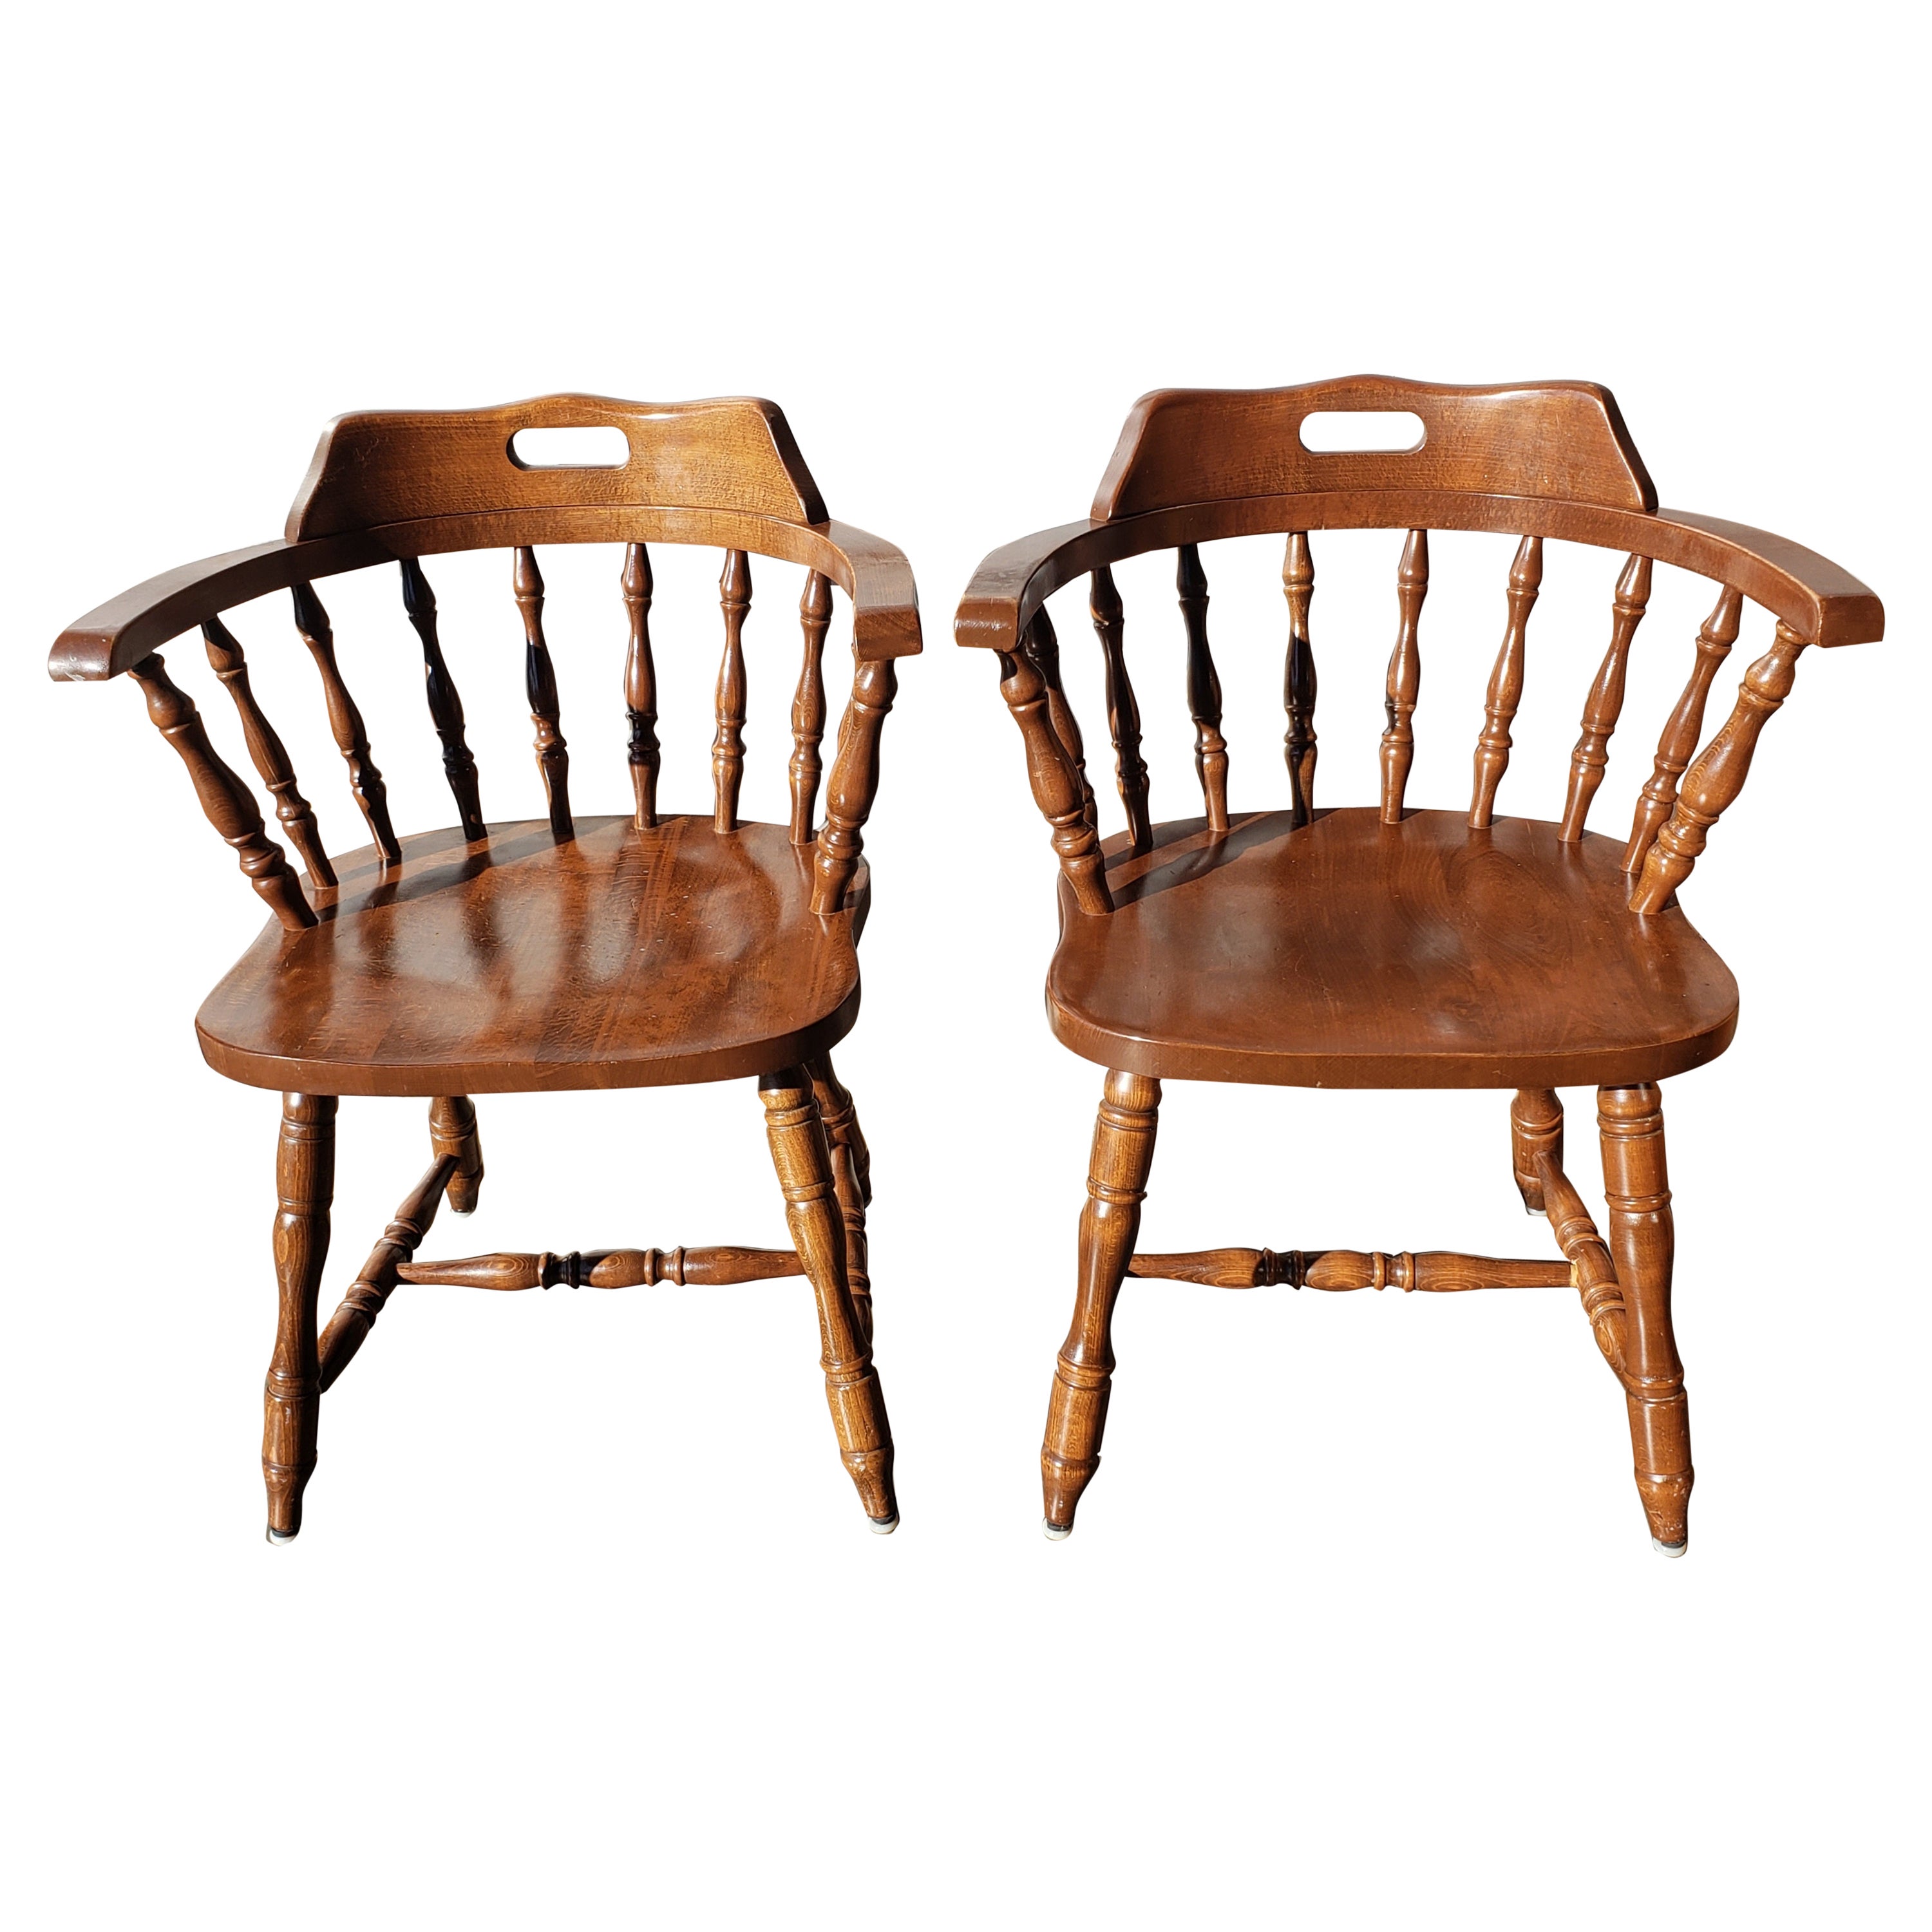 1970s Slavic Solid Cherry Low-Back Windsor Chairs, a Pair